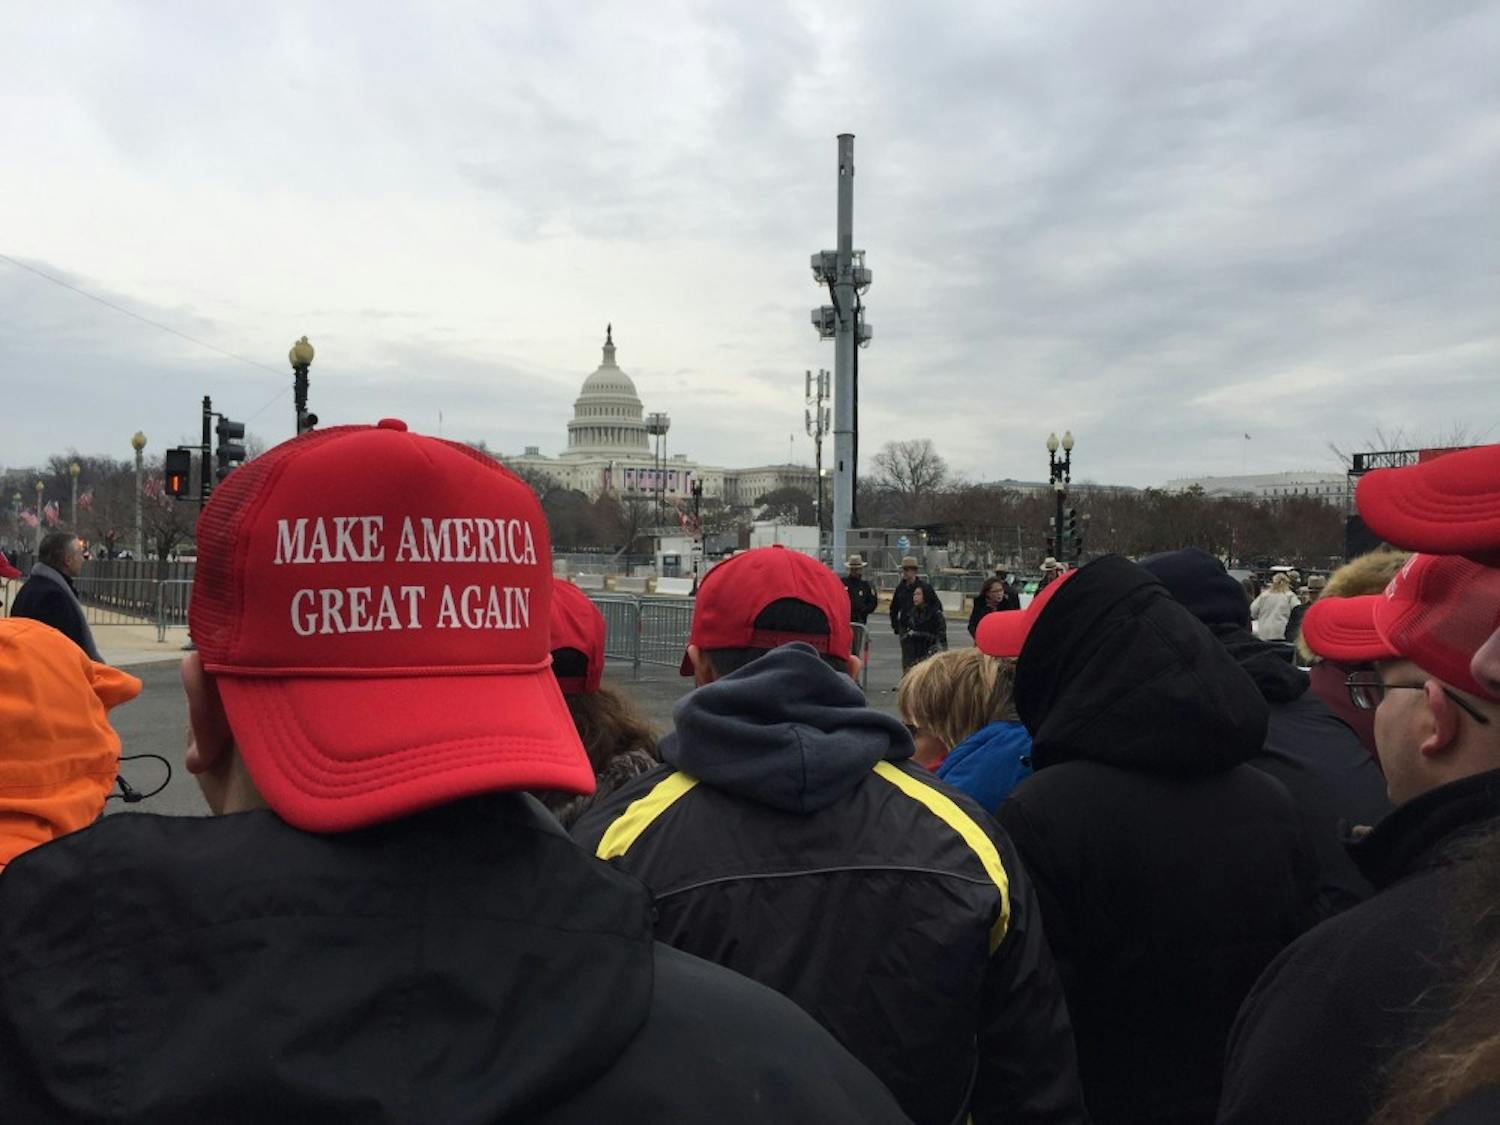 Trump supporters don "Make America Great Again" hats in the moments leading up to the president's inauguration.&nbsp;